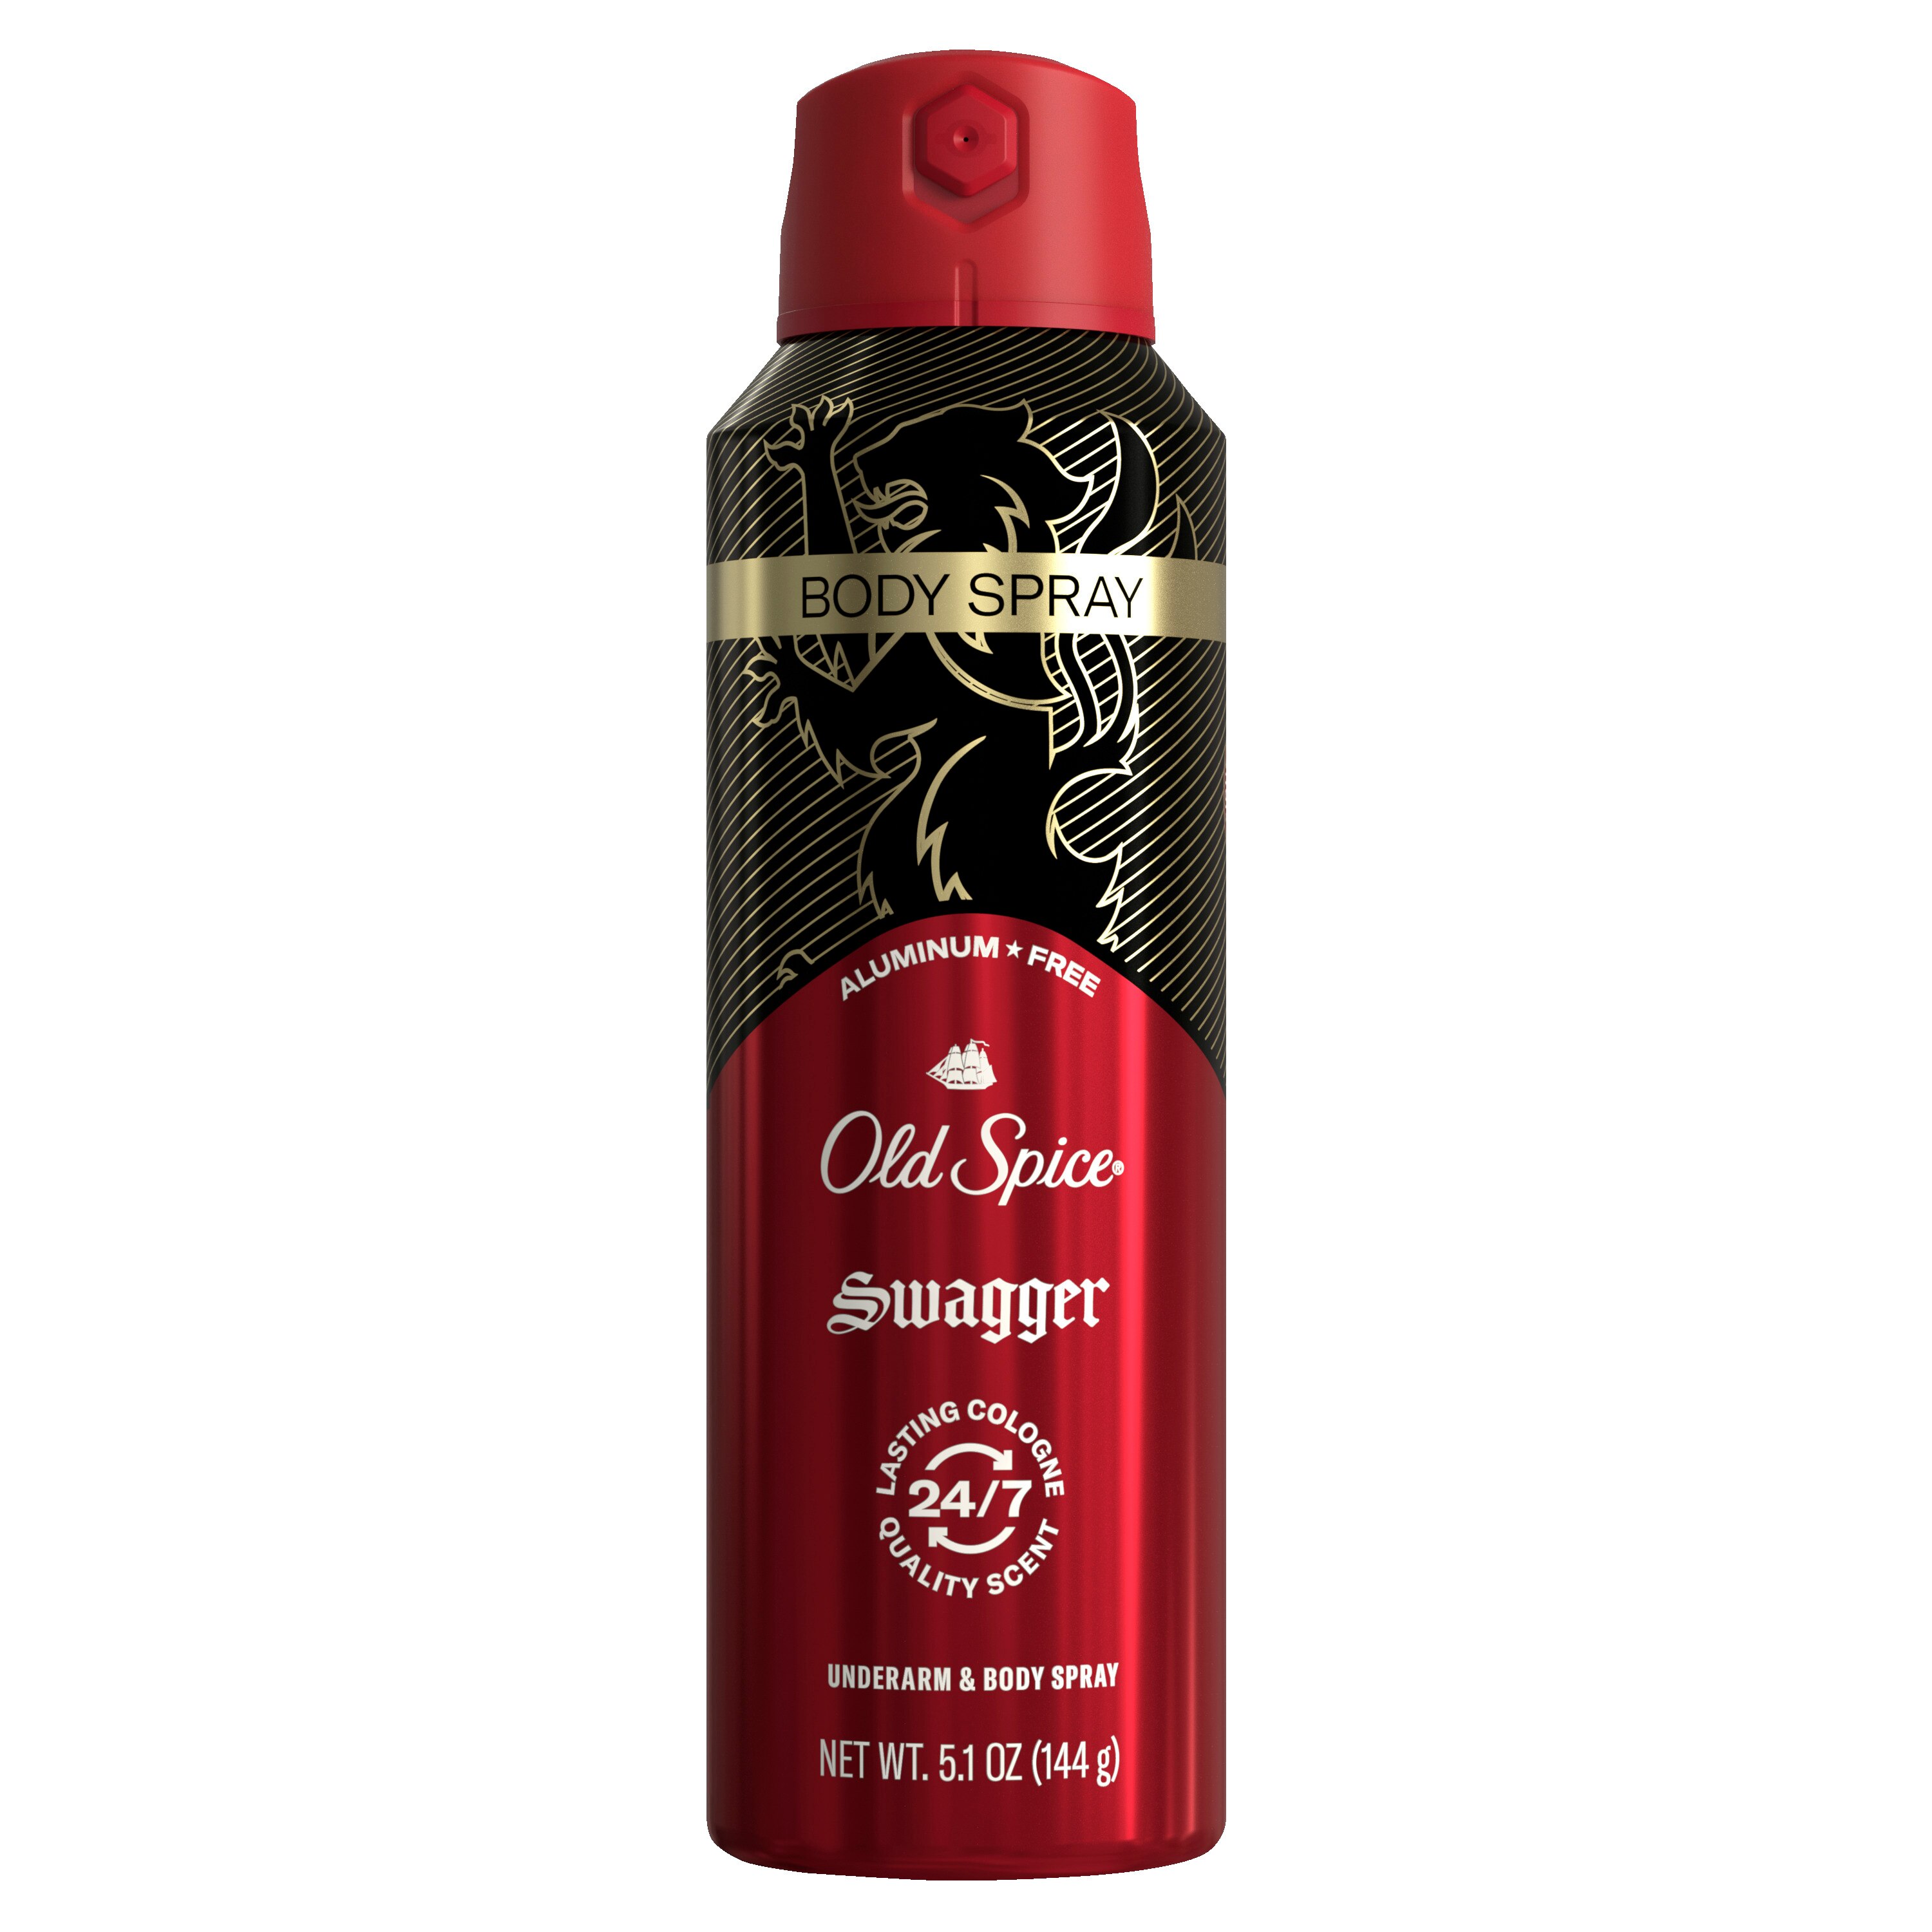 Old Spice Aluminum Free Body Spray for Men, Swagger, 5.1 OZ